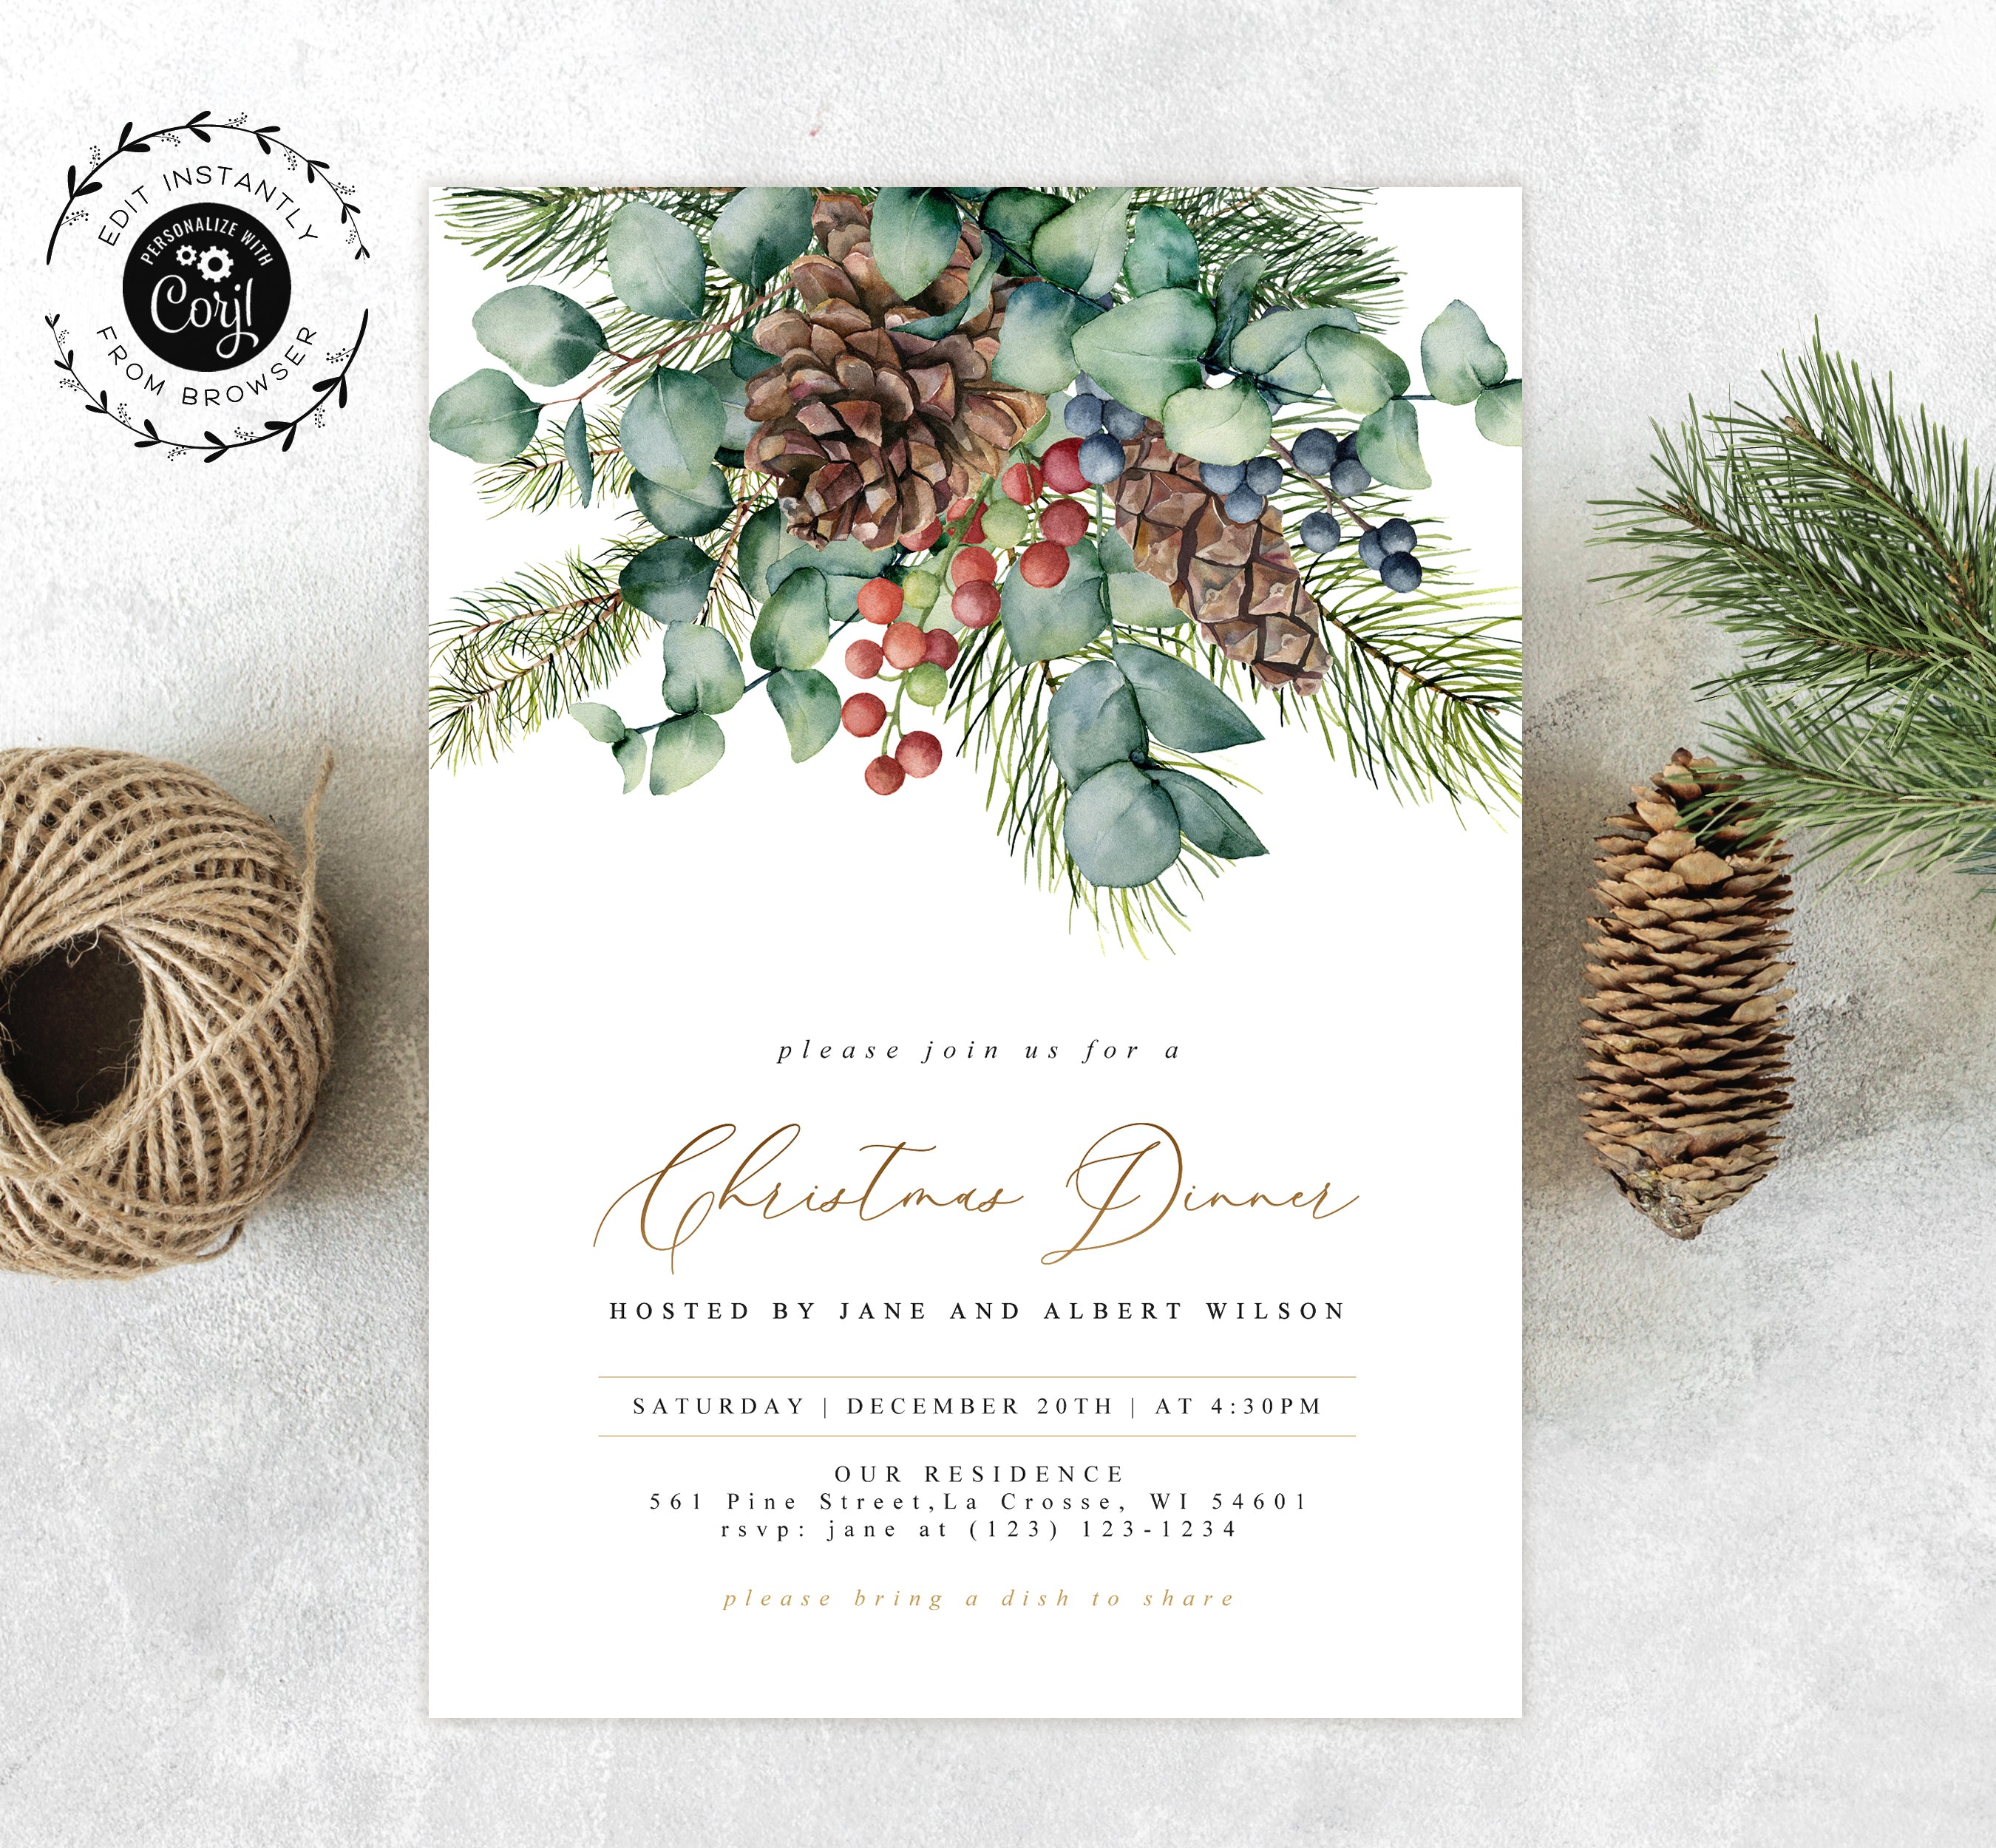 christmas dinner party invitation templates